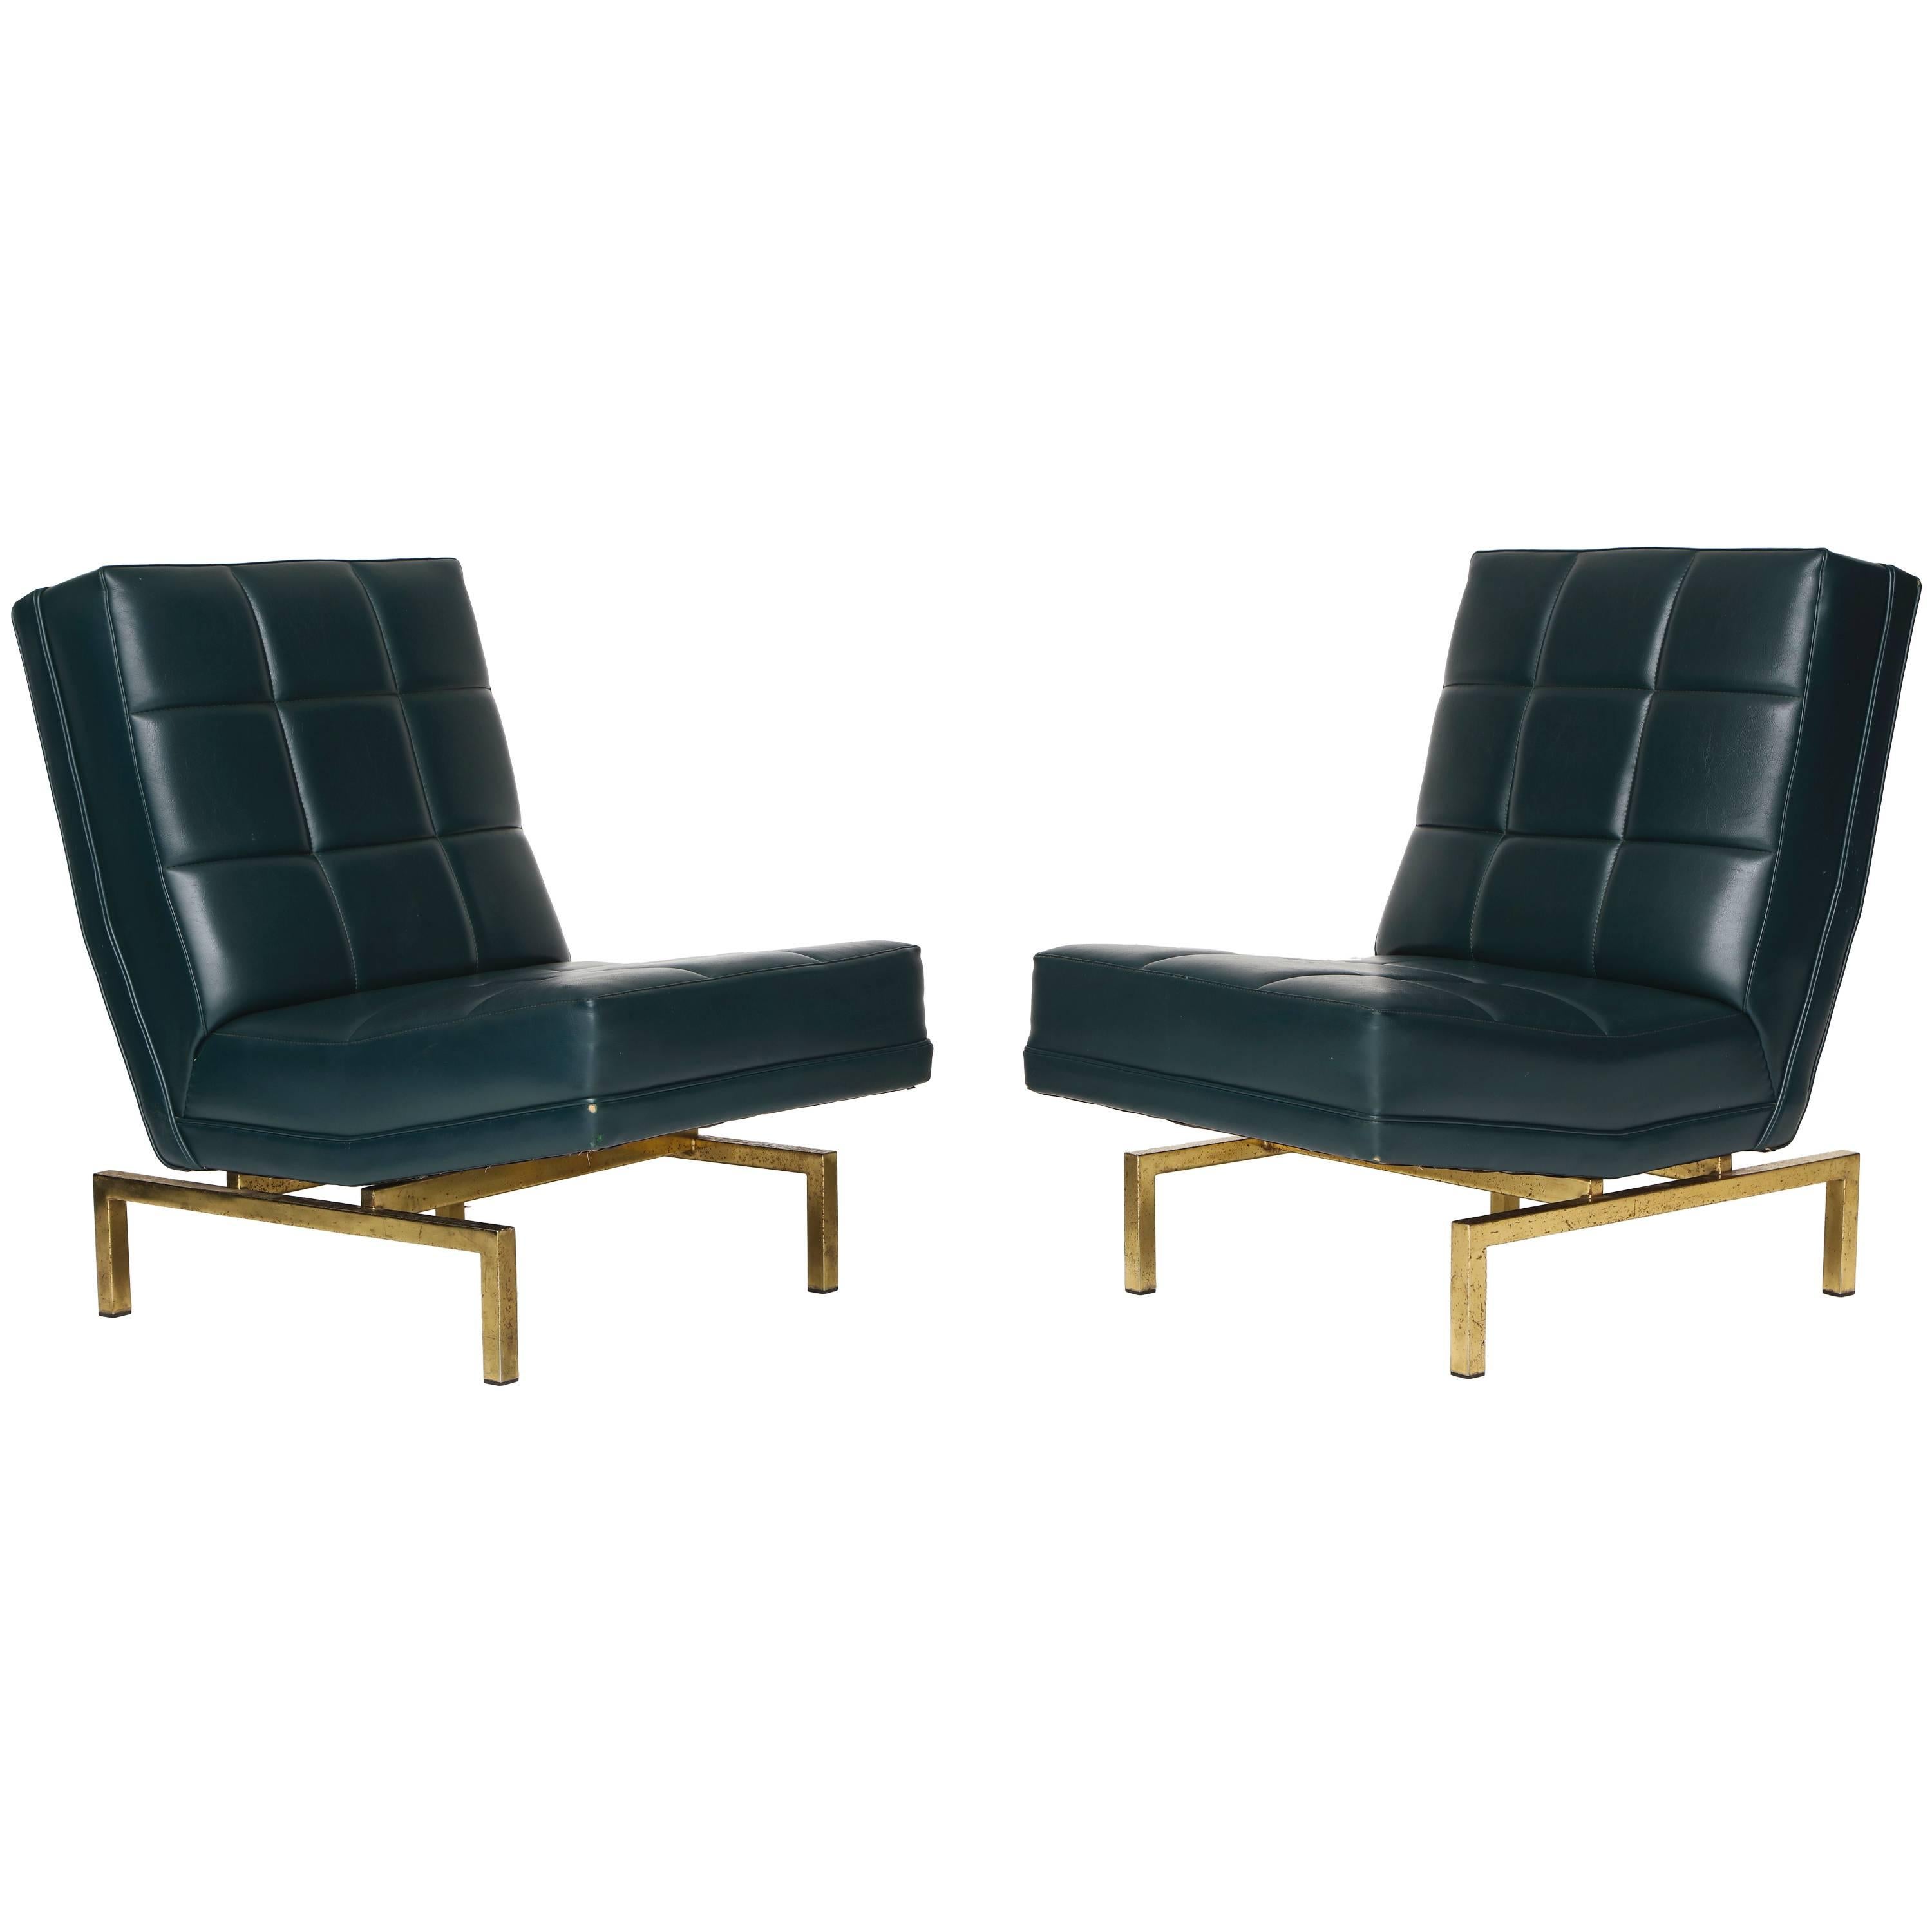 Louis Paolozzi Green Mid Century Lounge Chairs on Brass Bases, France, 1950s
Beautiful green faux leather lounge chairs on brass bases.
Extremely comfortable. 
Louis Paolozzi was a designer in post war France during the golden era of French